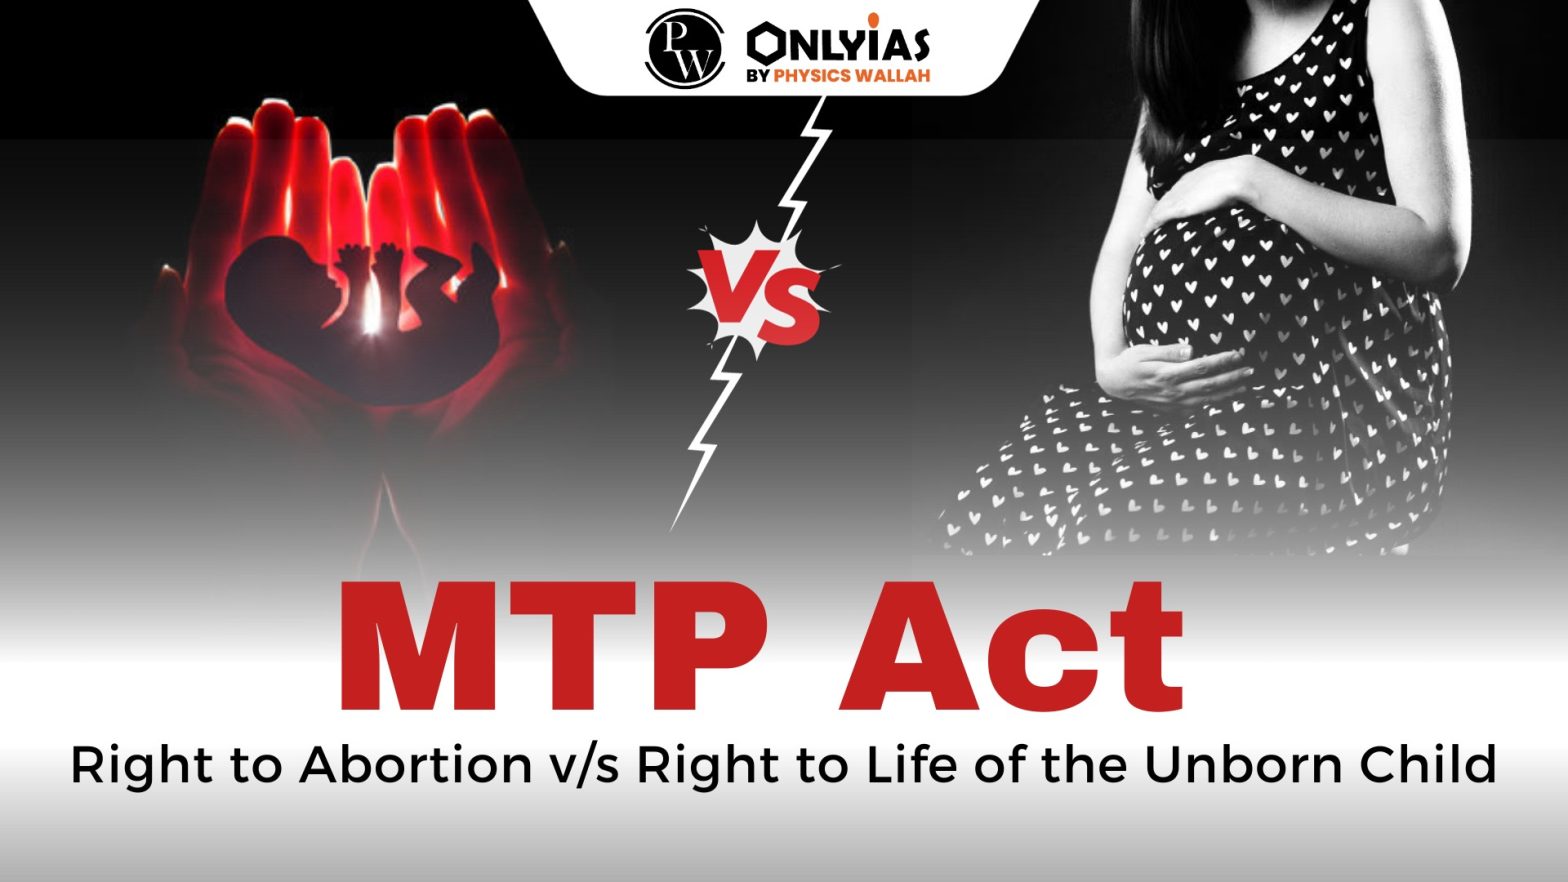 MTP Act: Right to Abortion v/s. Right to Life of the Unborn Child